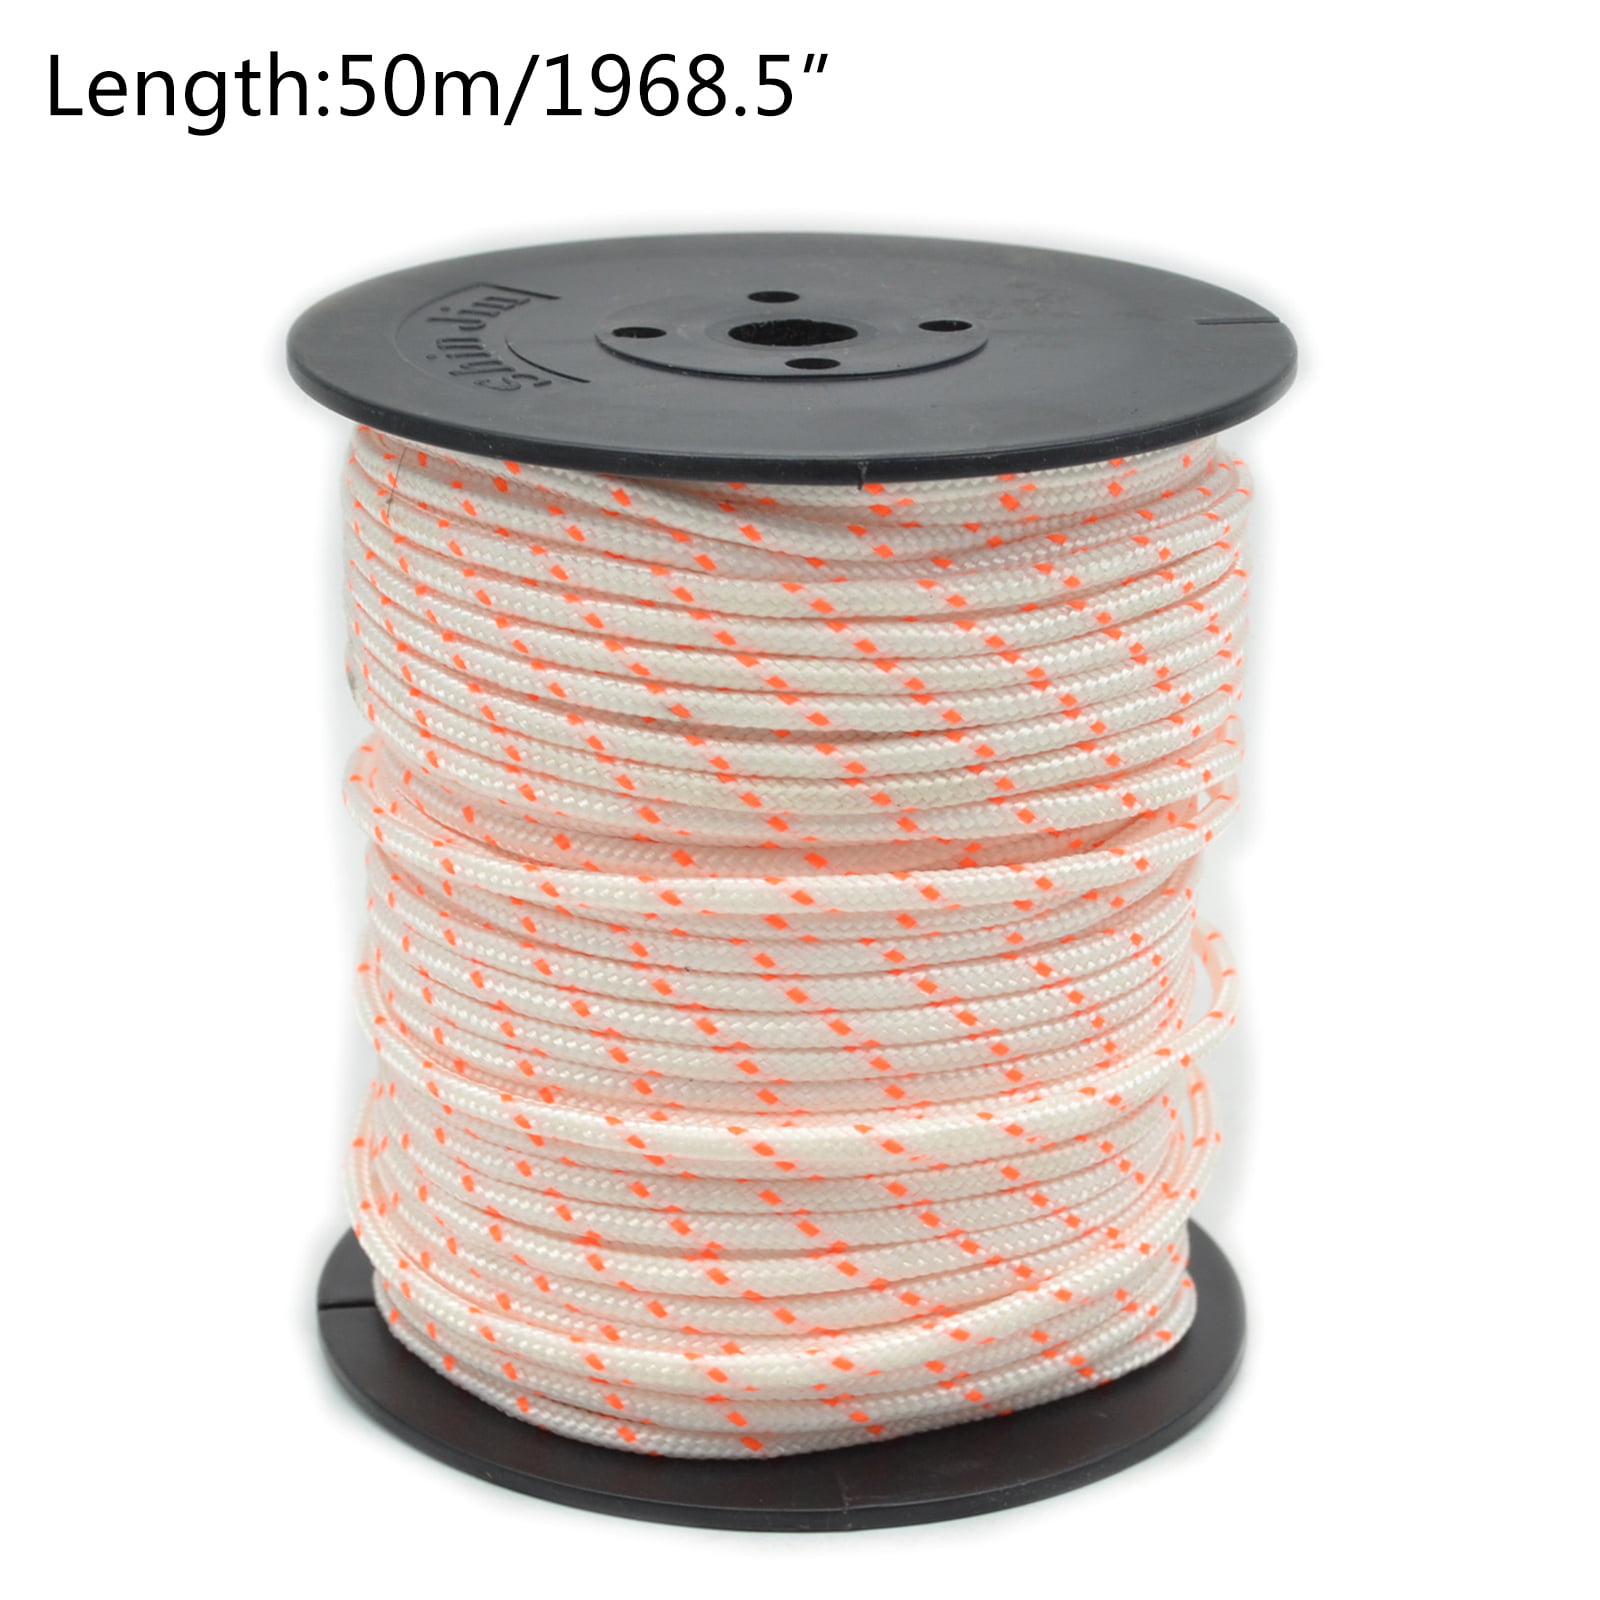 Details about   high quality Nylon Pull Starter Recoil Start Cord Rope for Lawnmower Chainsaw 